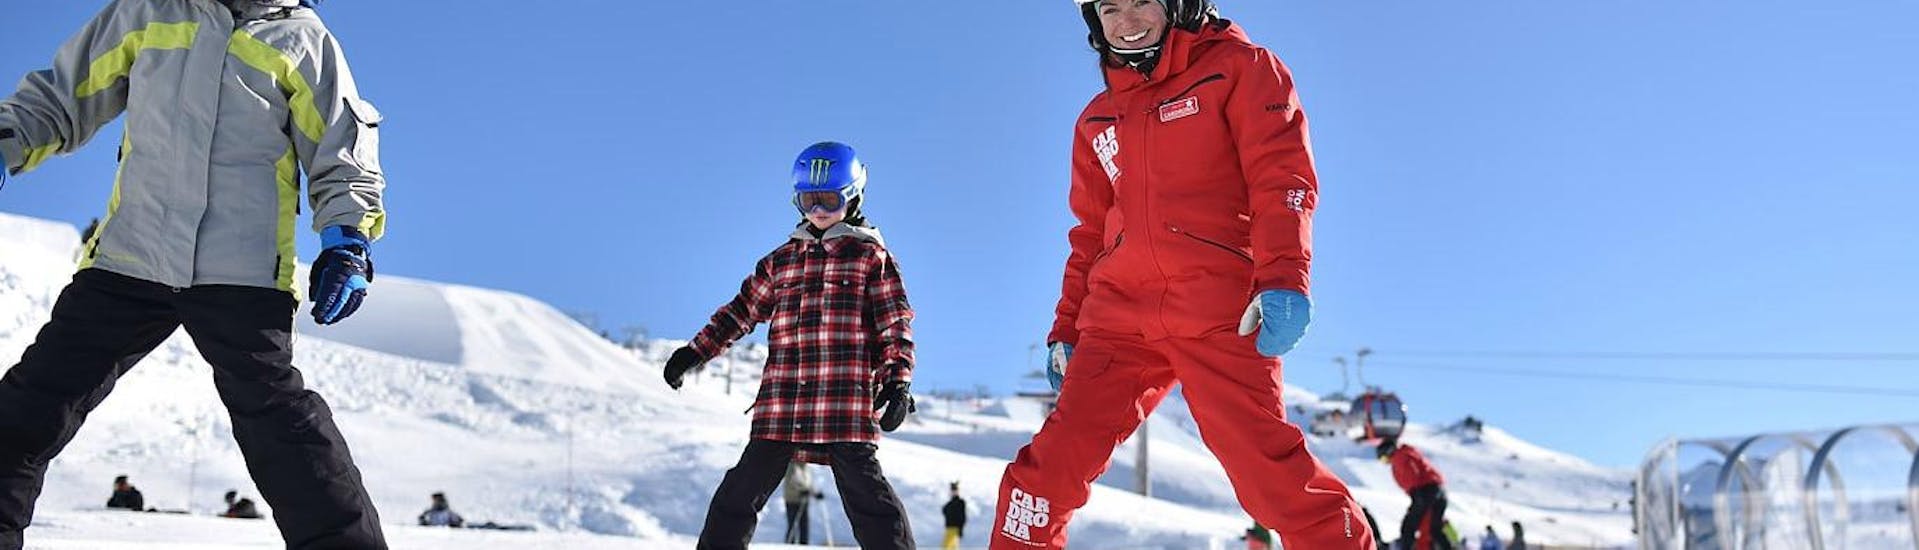 Kids Ski Lessons (5-17 years) - First Timer Package.